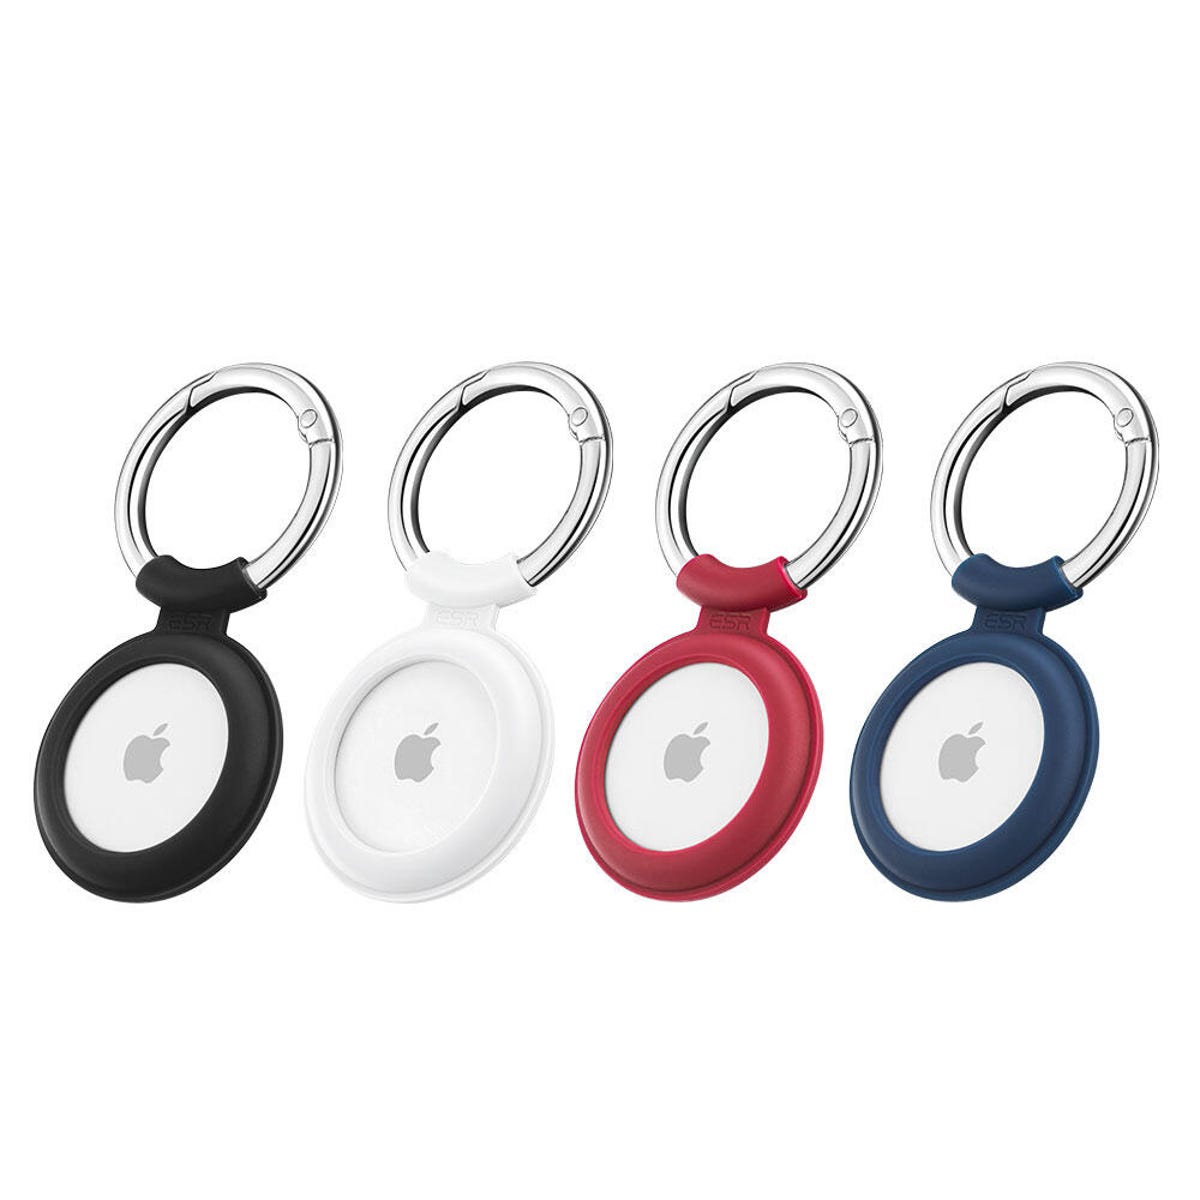 Four colors of silicone AirTag accessories